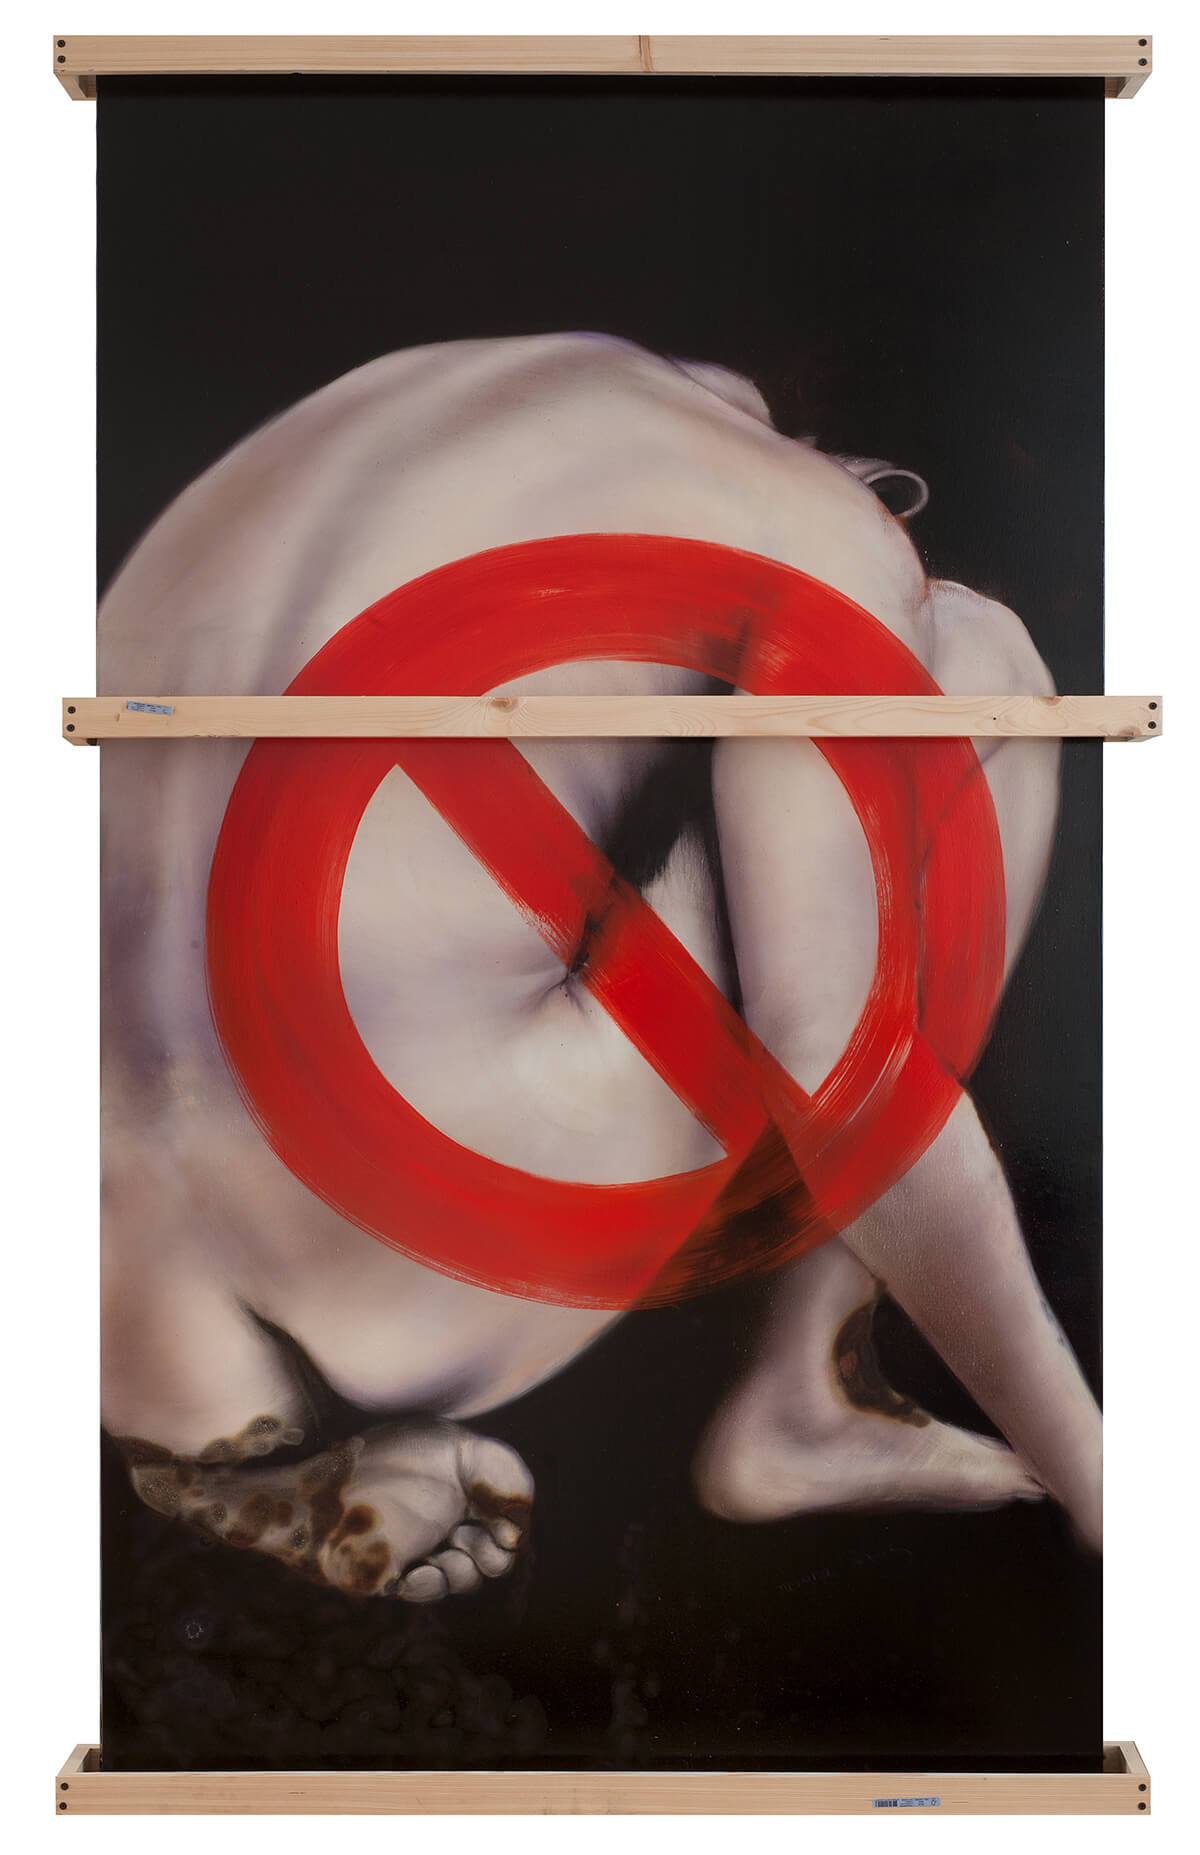 painting of naked woman's back hunched over with red no entry sign painted over the top